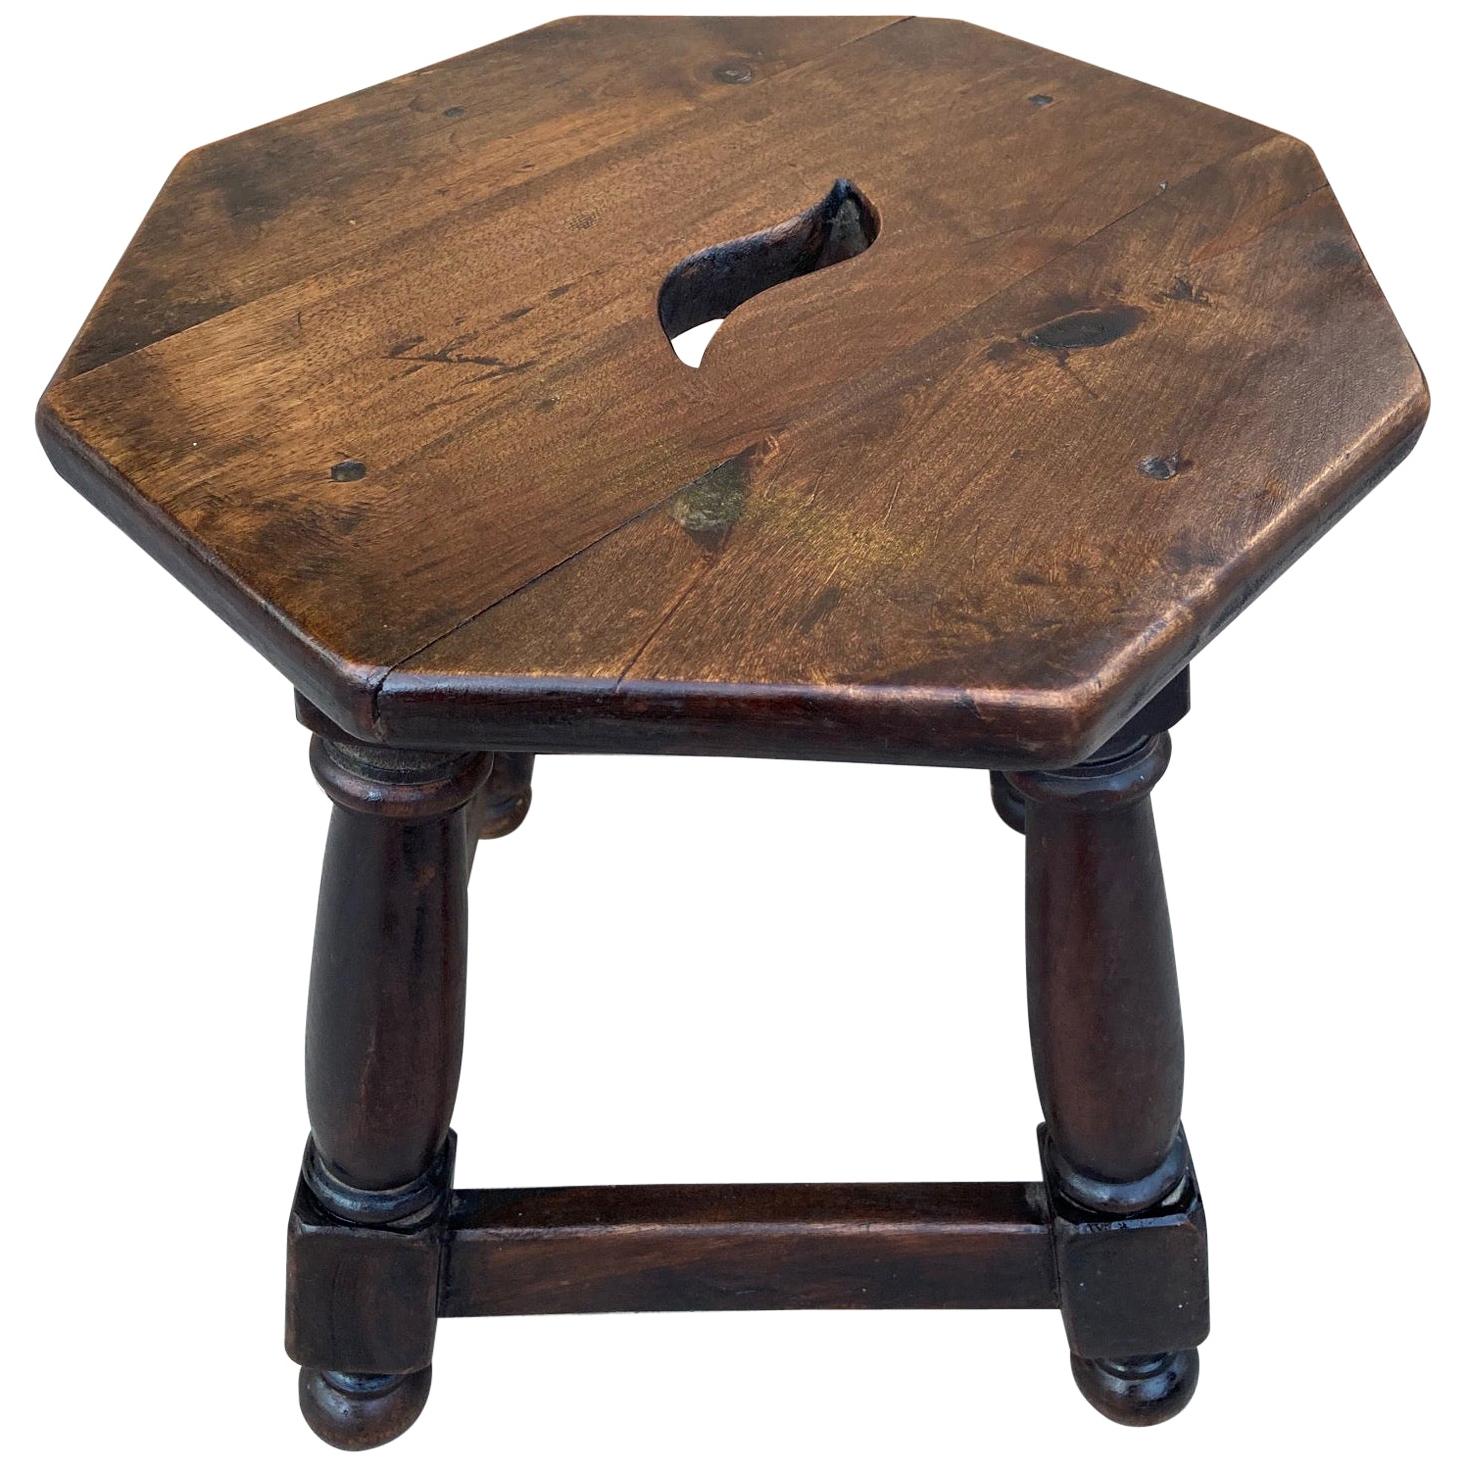 20th Century Spanish Rustic Walnut Low Stool or Low Table